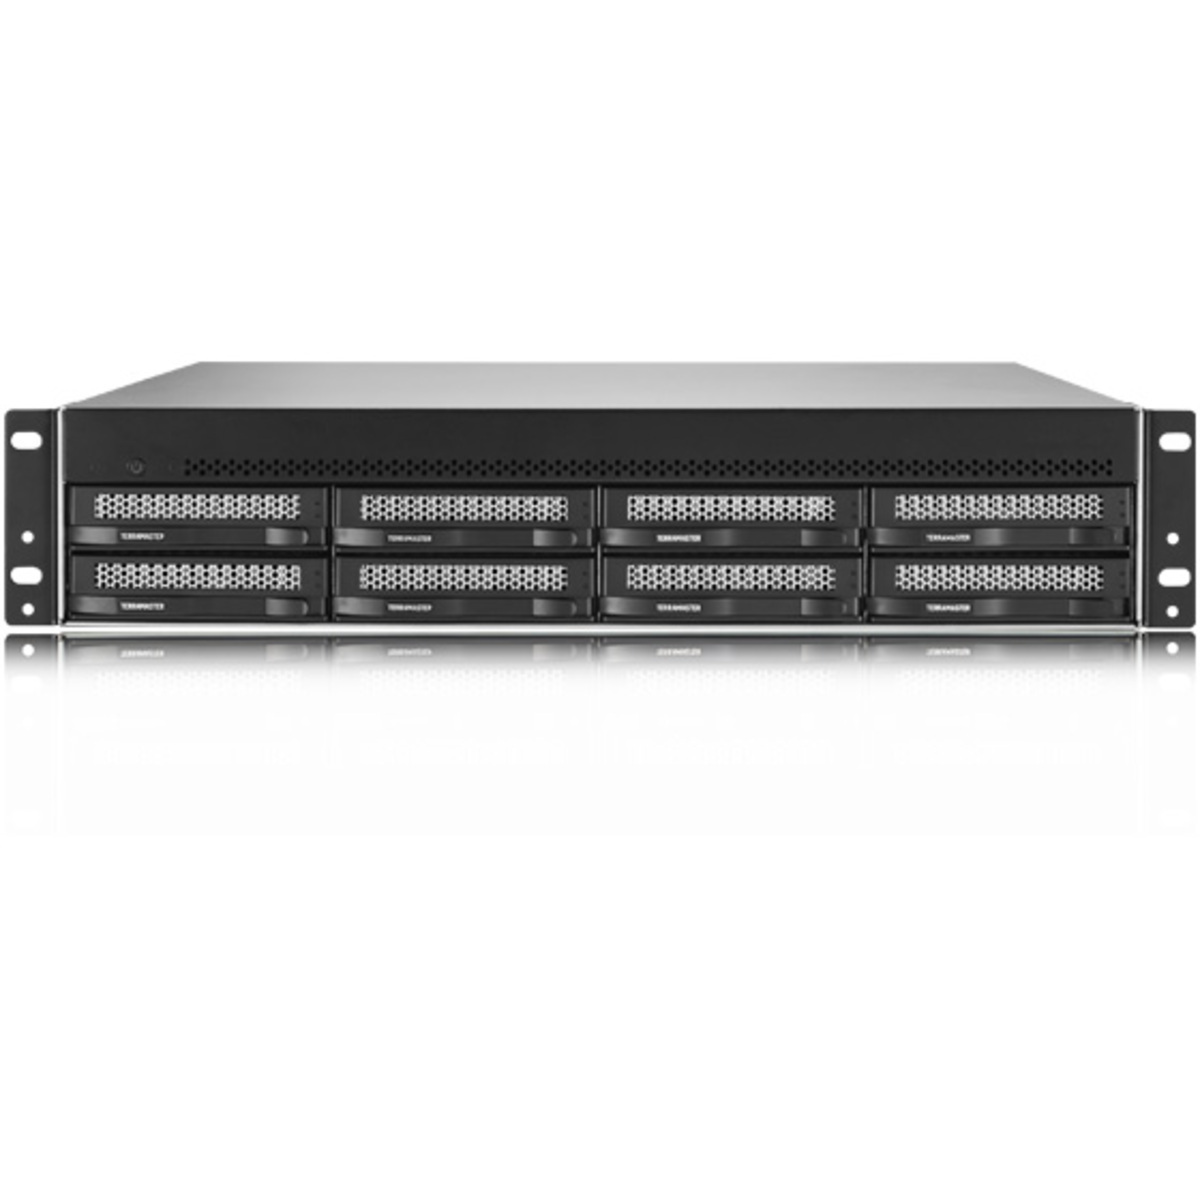 TerraMaster U8-450 24tb 8-Bay RackMount Multimedia / Power User / Business NAS - Network Attached Storage Device 6x4tb Samsung 870 EVO MZ-77E4T0BAM 2.5 560/530MB/s SATA 6Gb/s SSD CONSUMER Class Drives Installed - Burn-In Tested - ON SALE U8-450